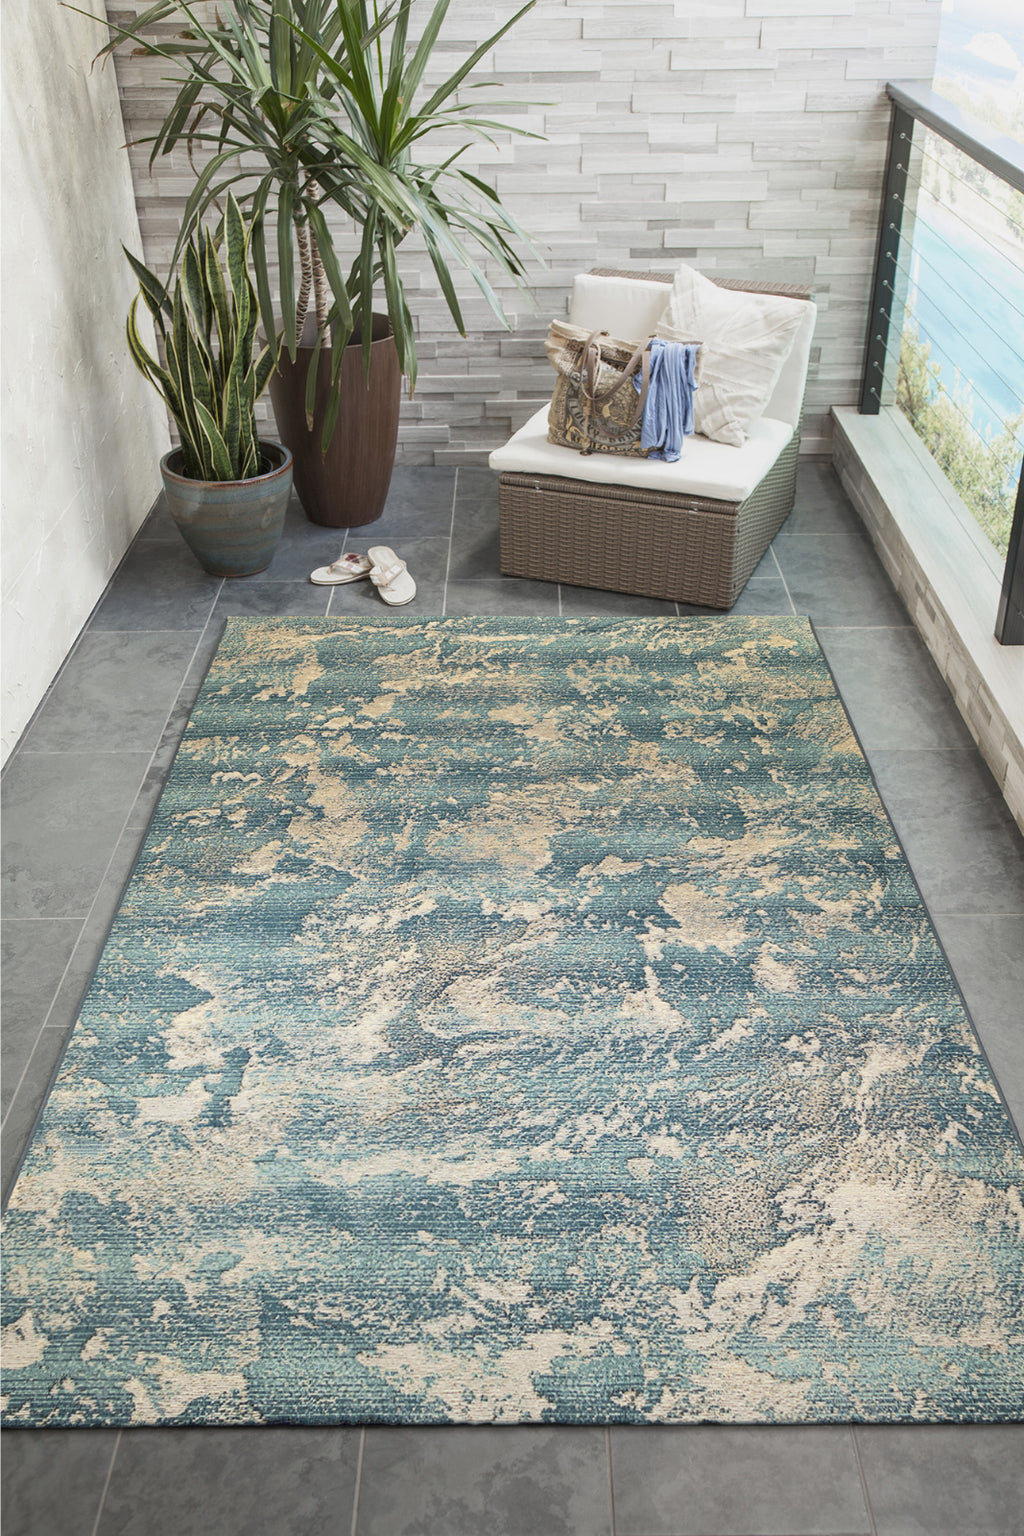 Trans Ocean Marina 8100/03 Stormy Blue Area Rug by Liora Manne Room Scene Image Feature